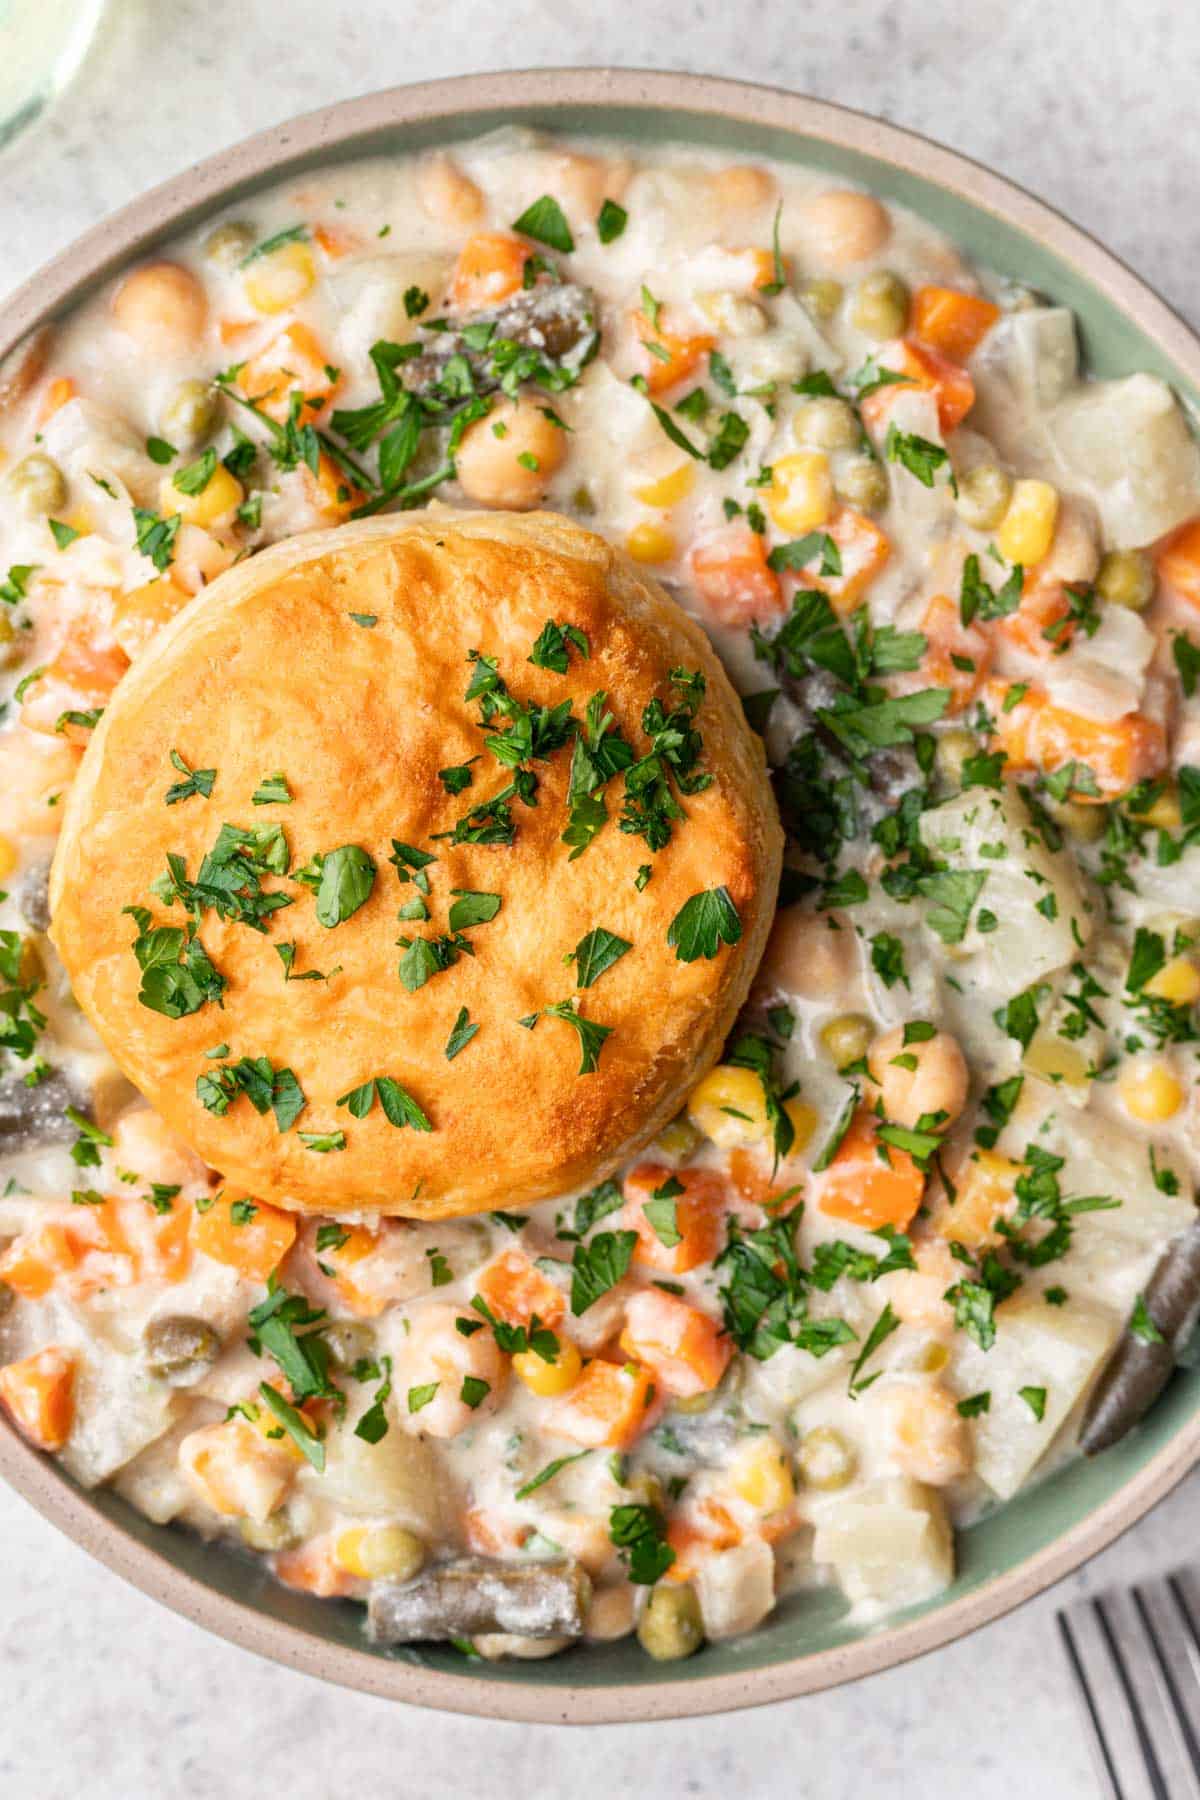 Vegan pot pie topped with biscuits.